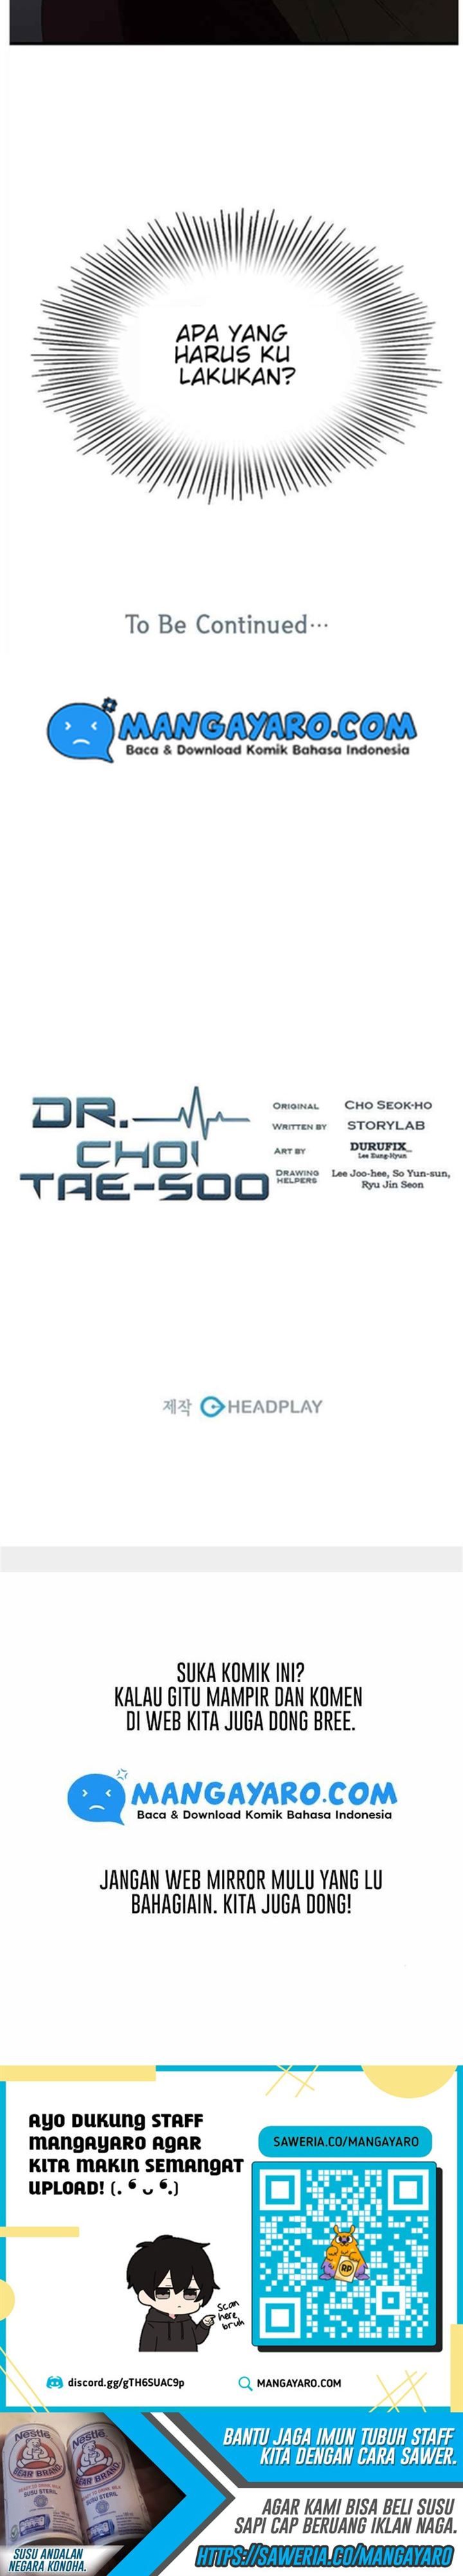 Dr. Choi Tae-Soo Chapter 57